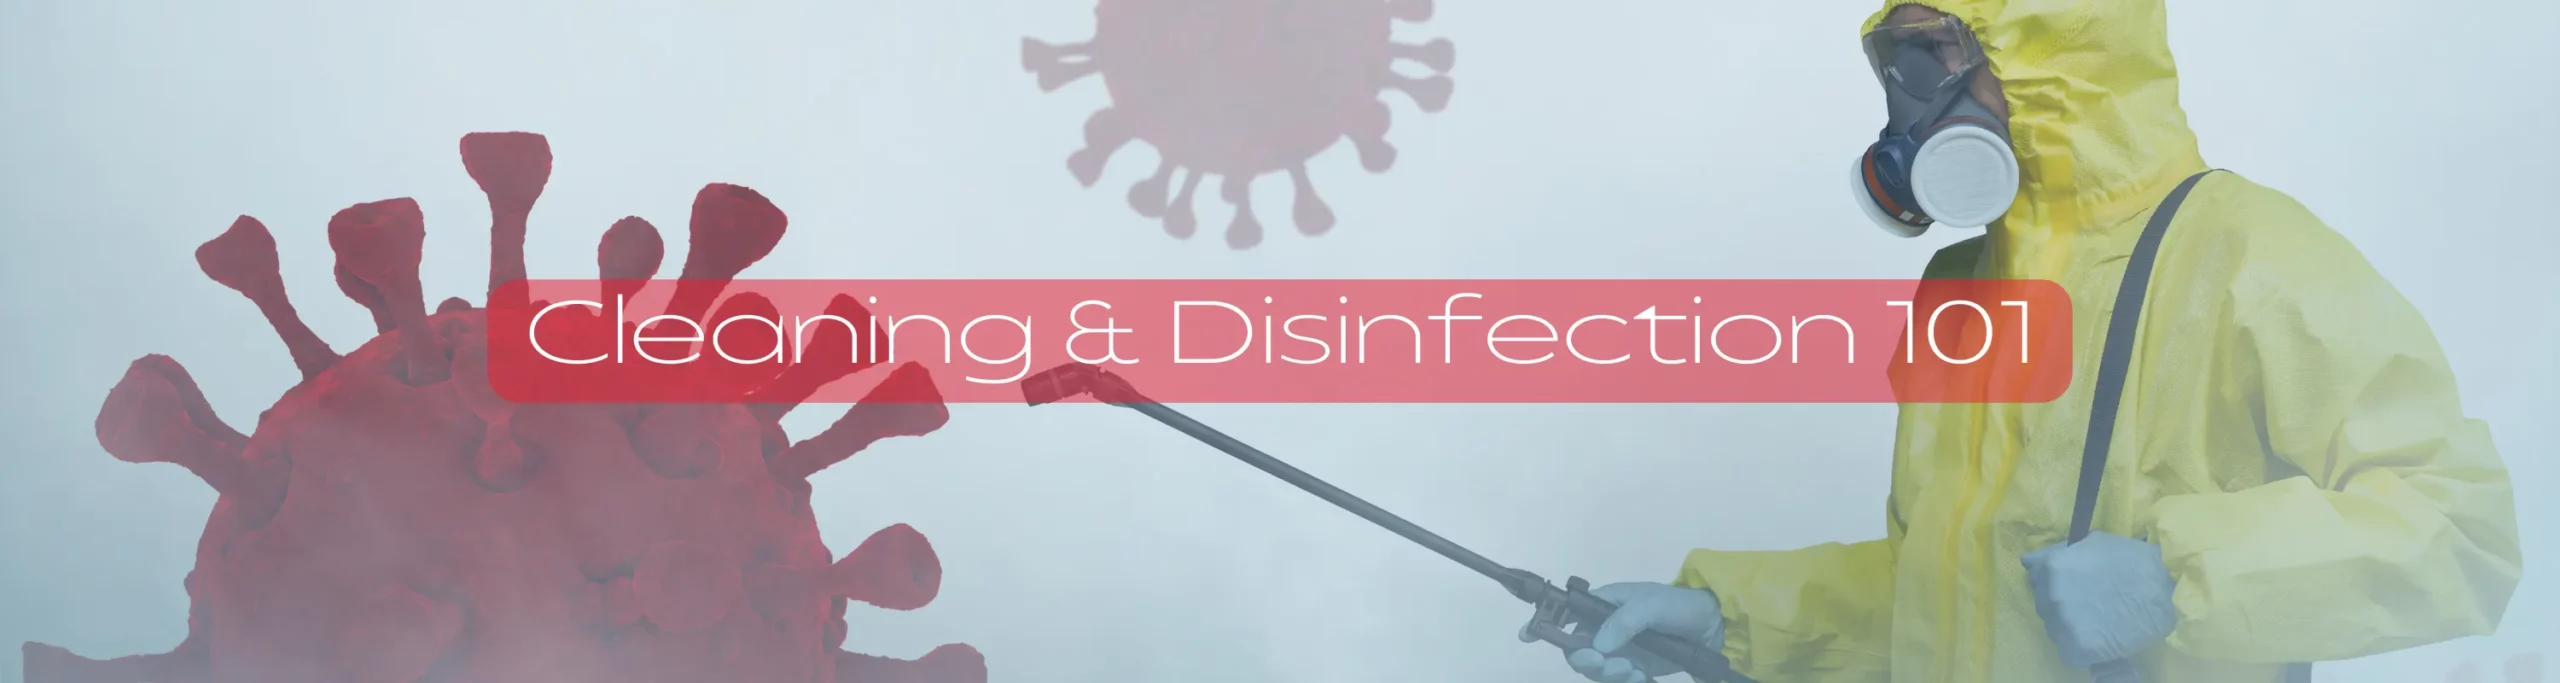 Cleaning & Disinfection 101 Banner